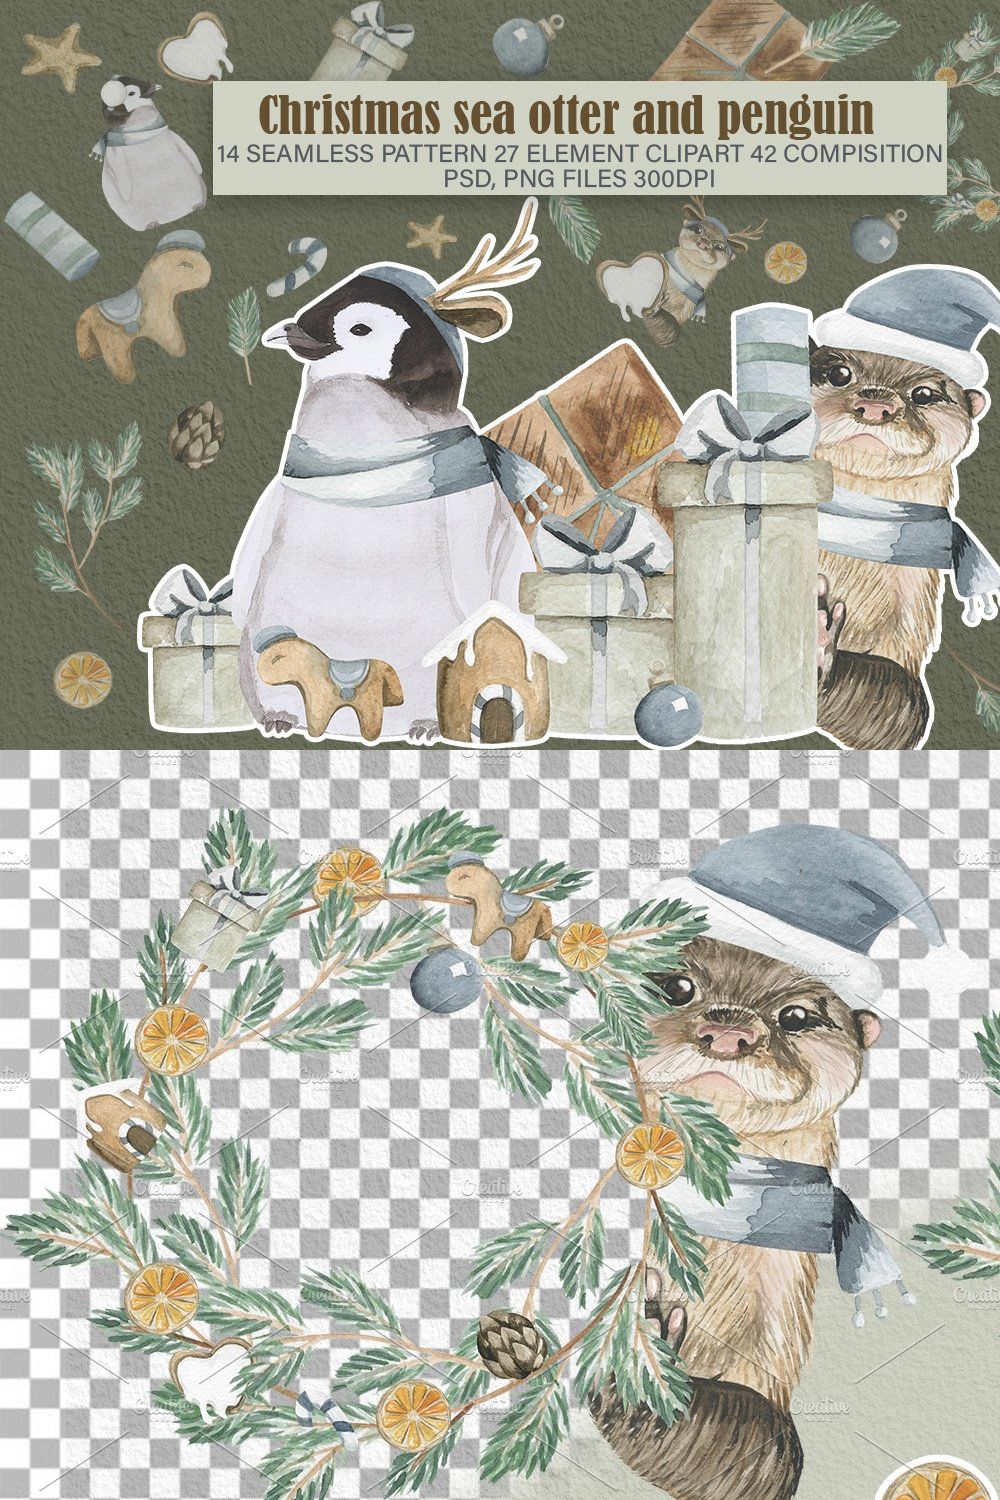 Christmas clipart penguin and otter pinterest preview image.